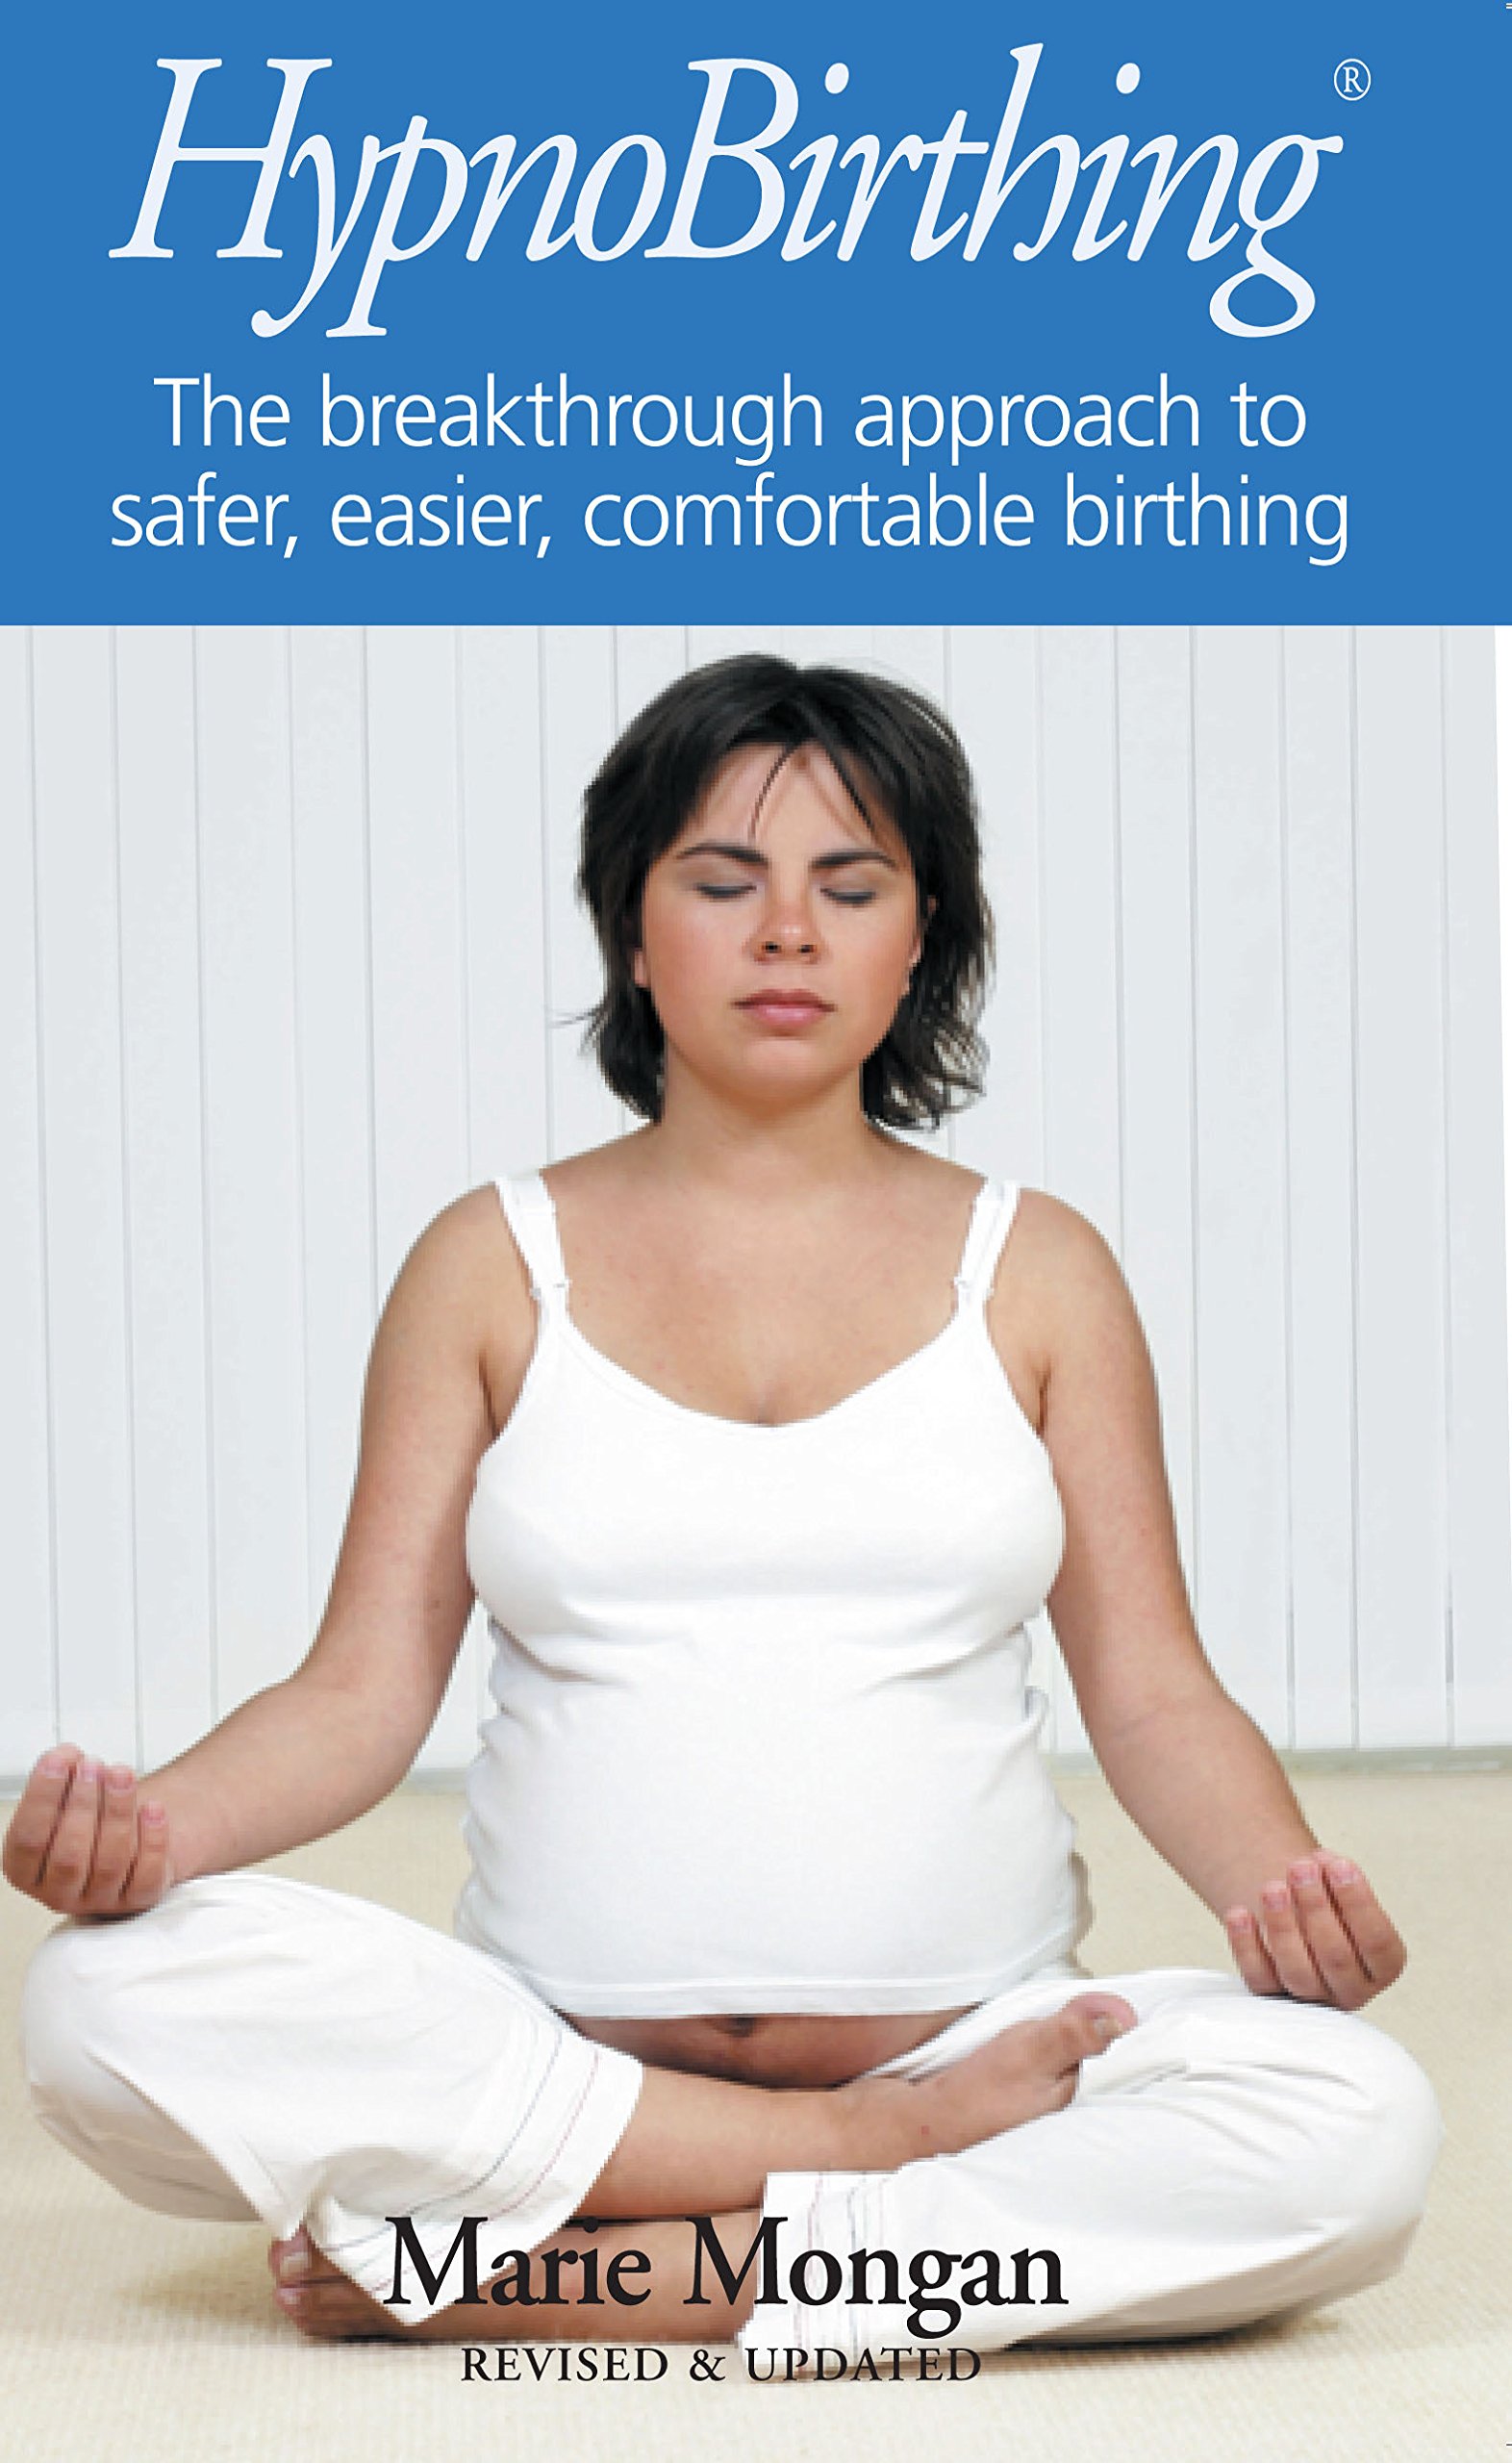 Hypnobirthing: The Breakthrough Approach to Safer, Easier, Comfortable Birthing